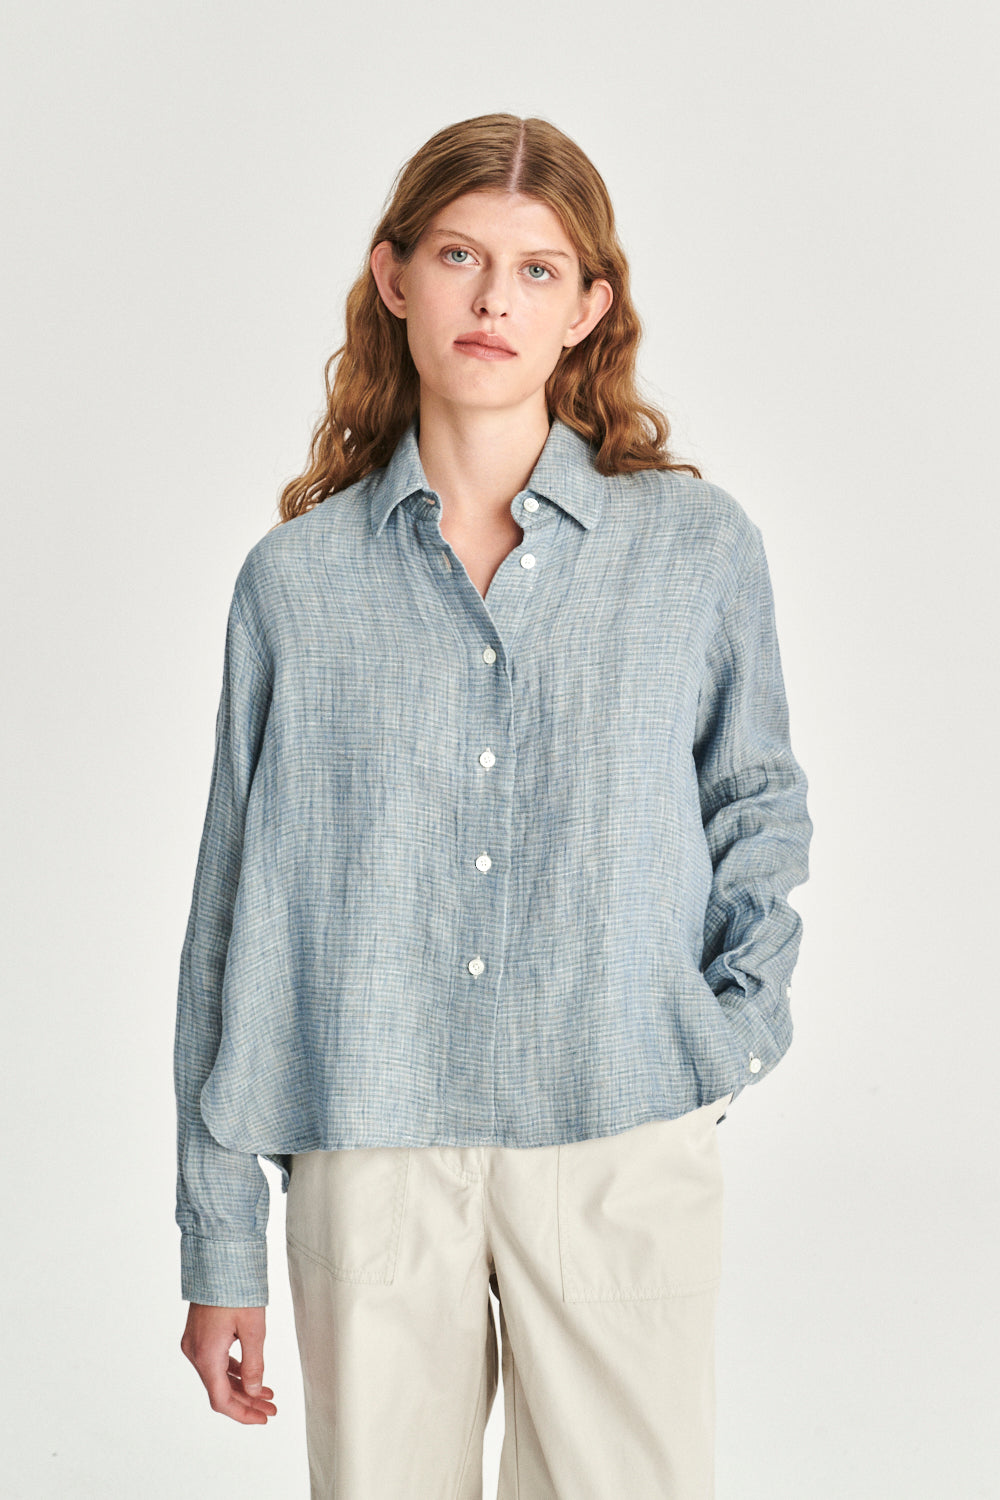 Relaxed Blouse in a Double Sided Blue and Green Italian Fatigue Linen and Cotton